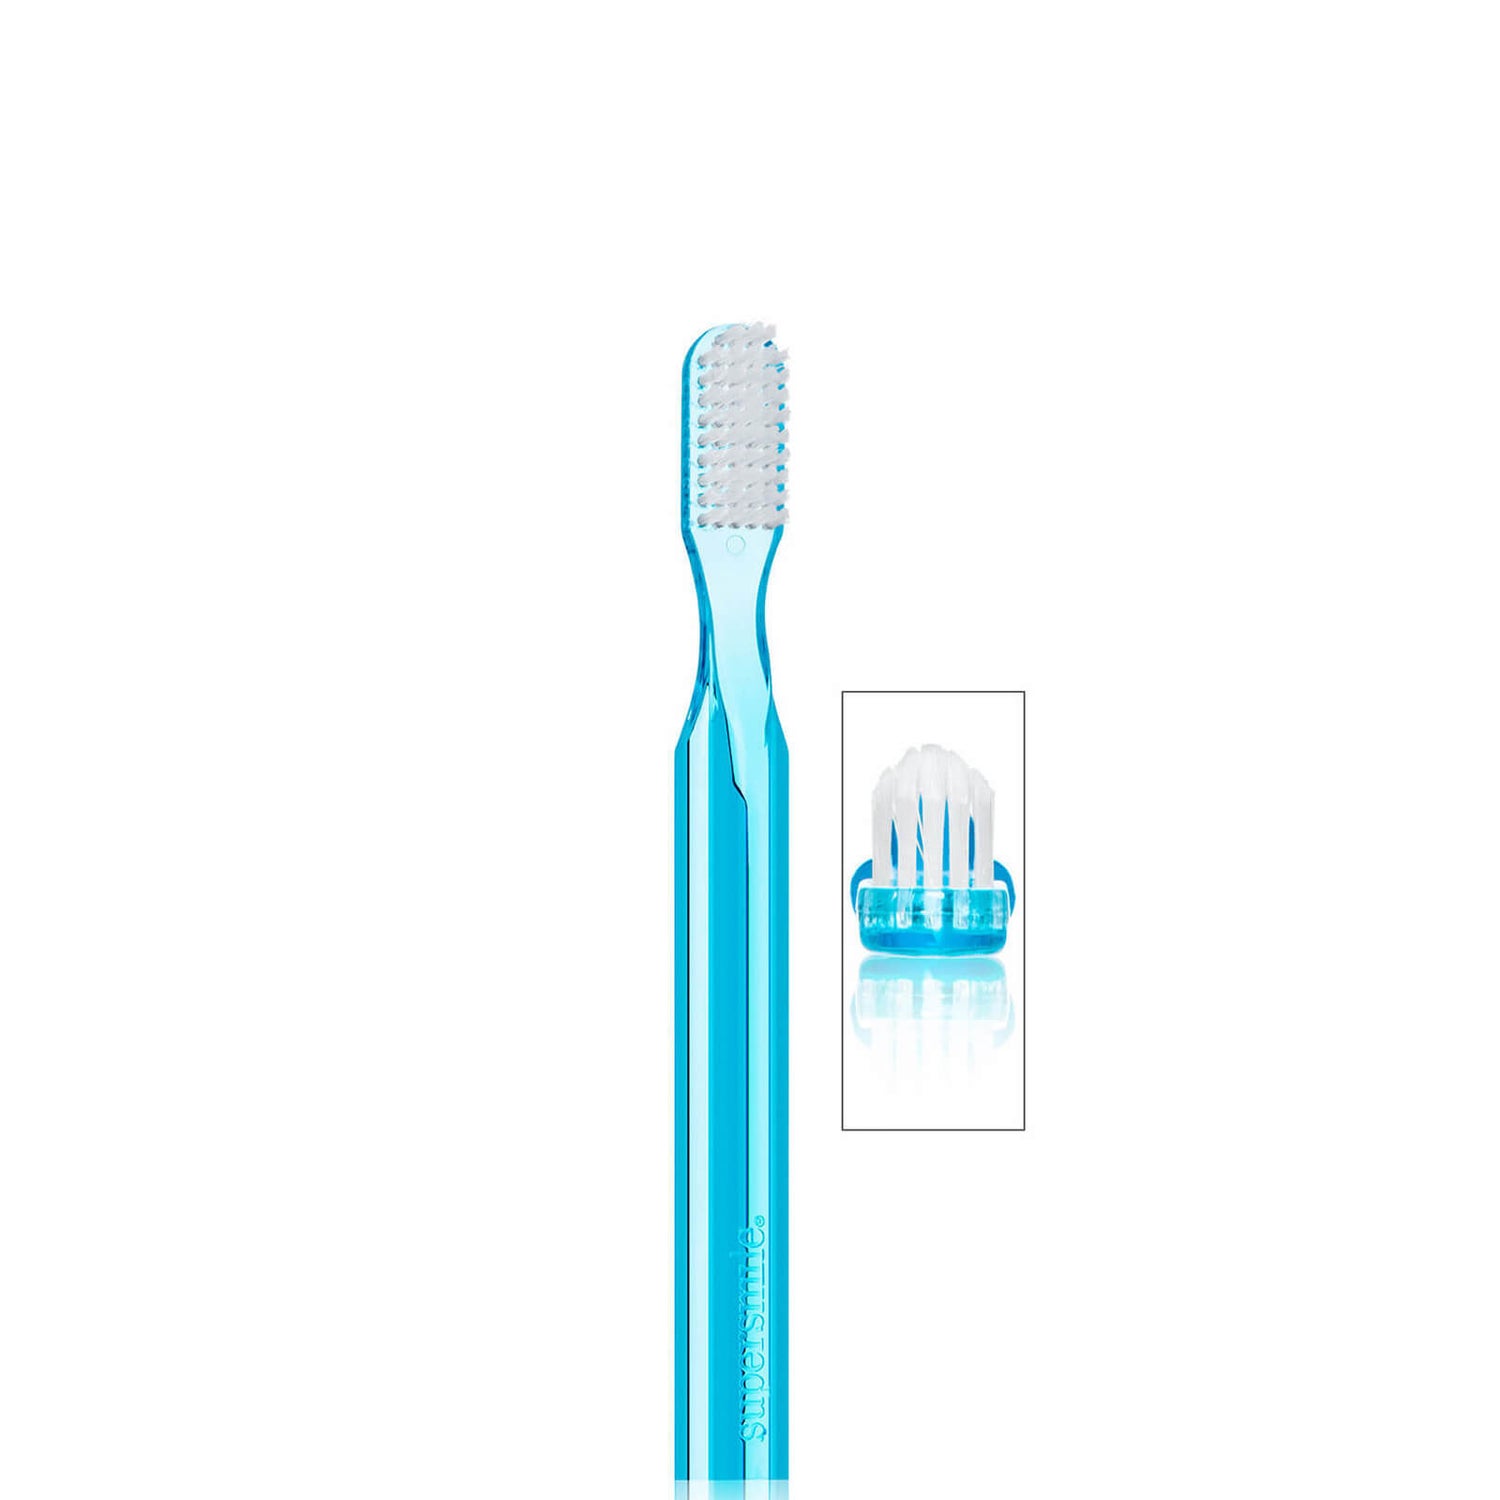 Supersmile 45 Degree Angled Toothbrush 1 piece